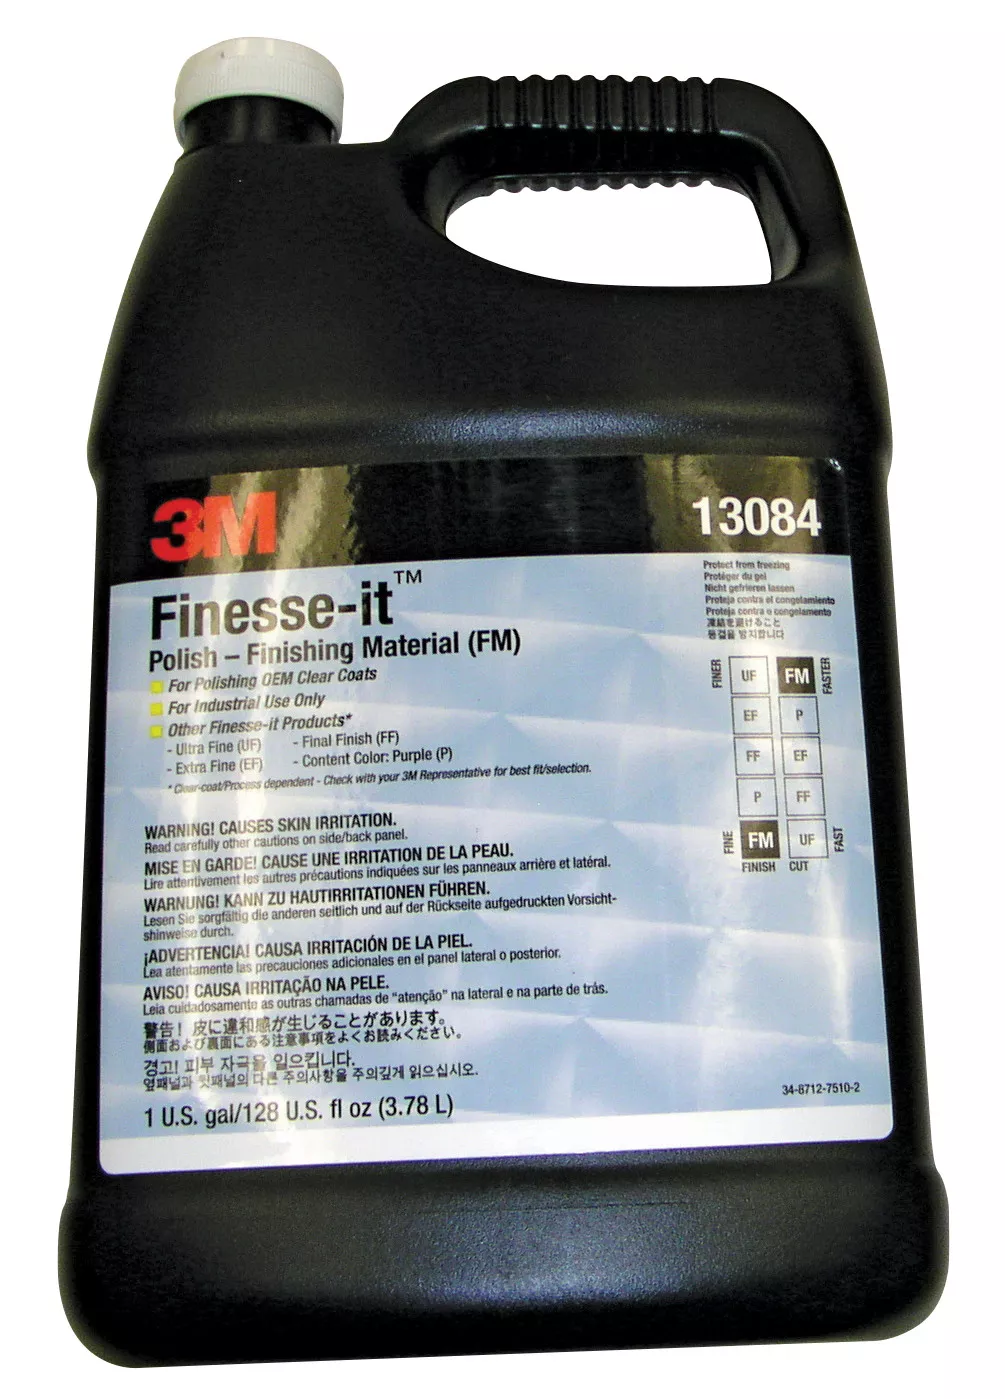 3M™ Finesse-it™ Polish Standard Series - Finishing Material (140),
83058, White, Easy Clean Up, 50 Gallon Drum, 1 ea/Case